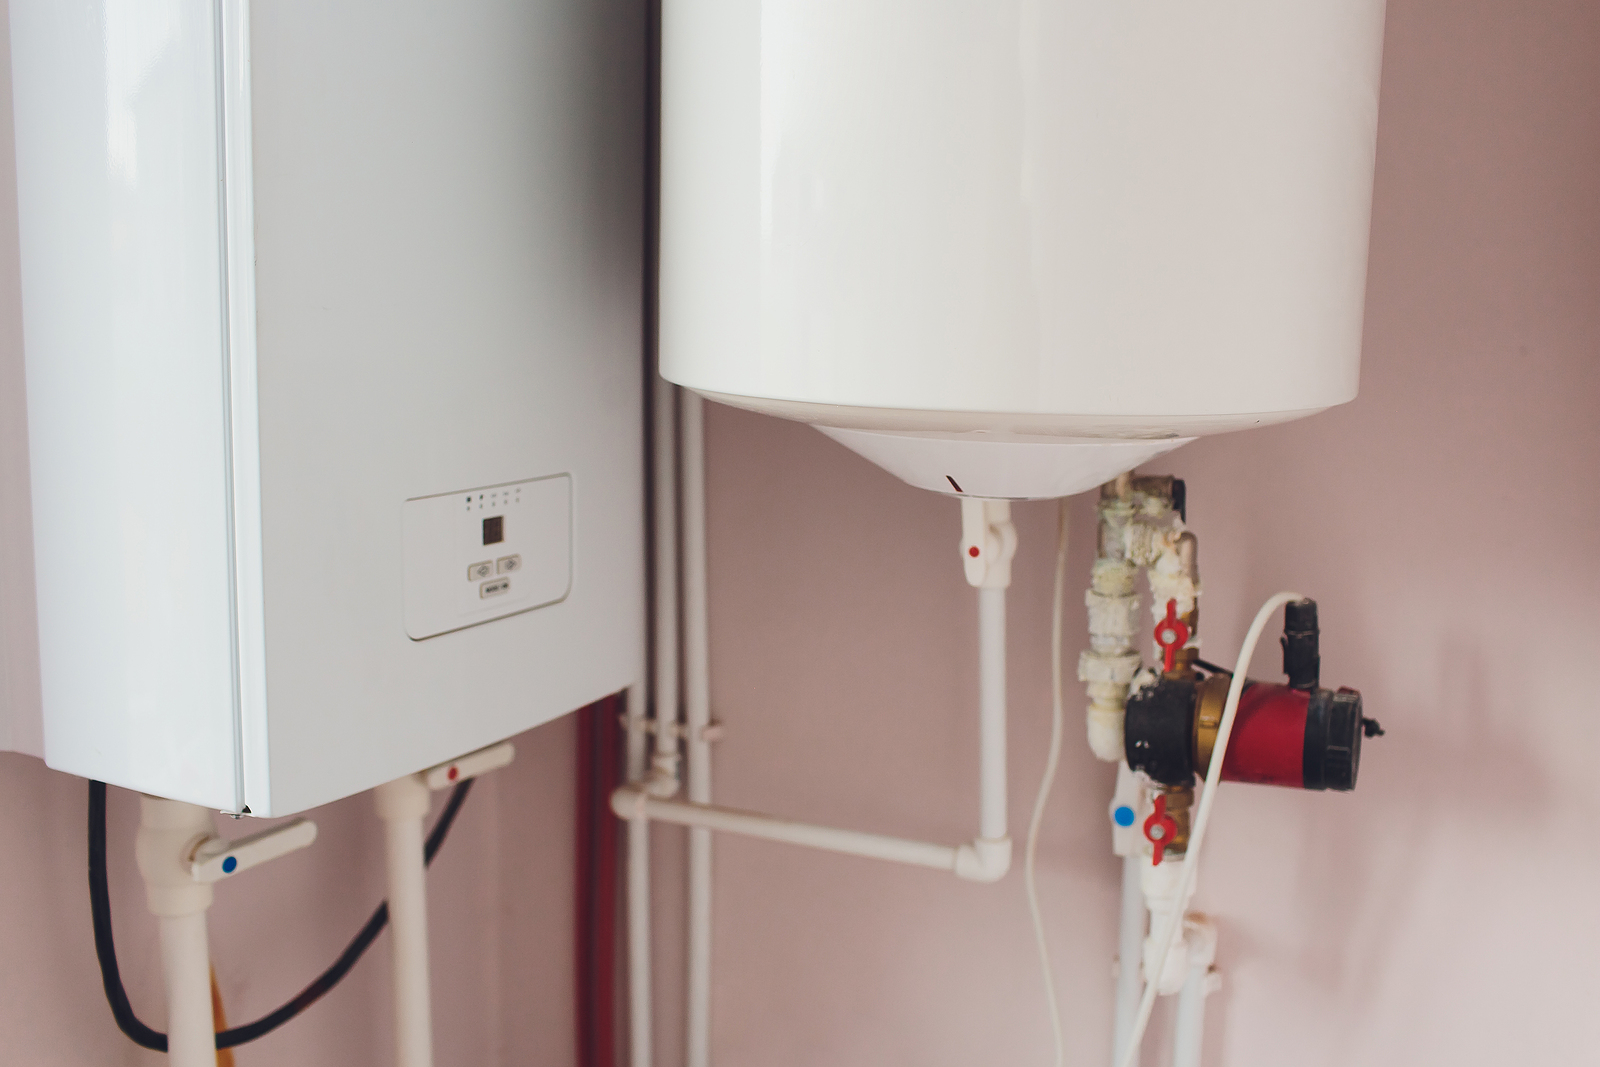 Homeowner Tips for Finding The Best Hot Water Plumbers in Canberra